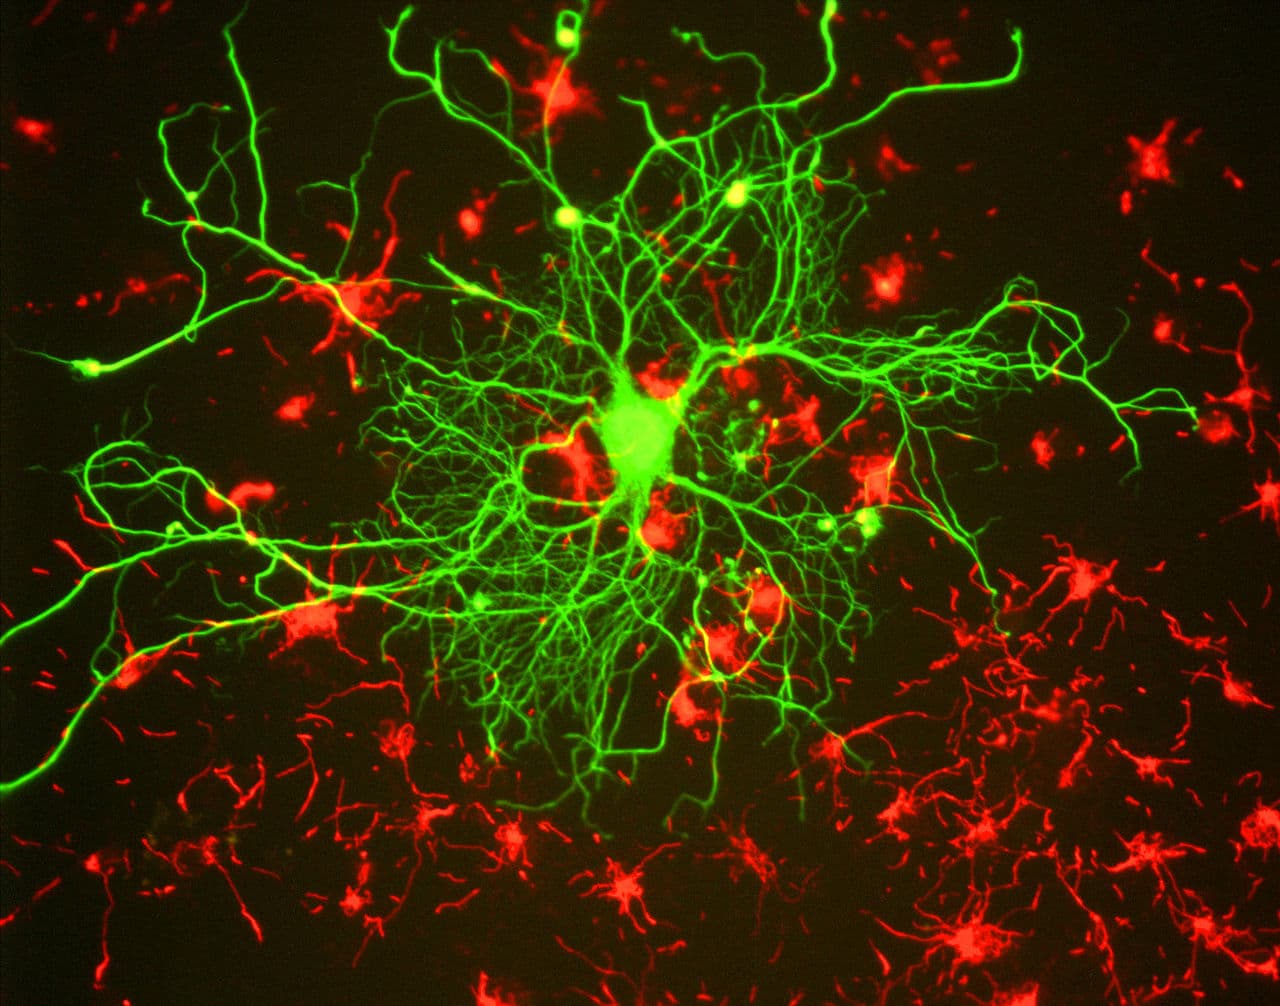 Knowing Neurons